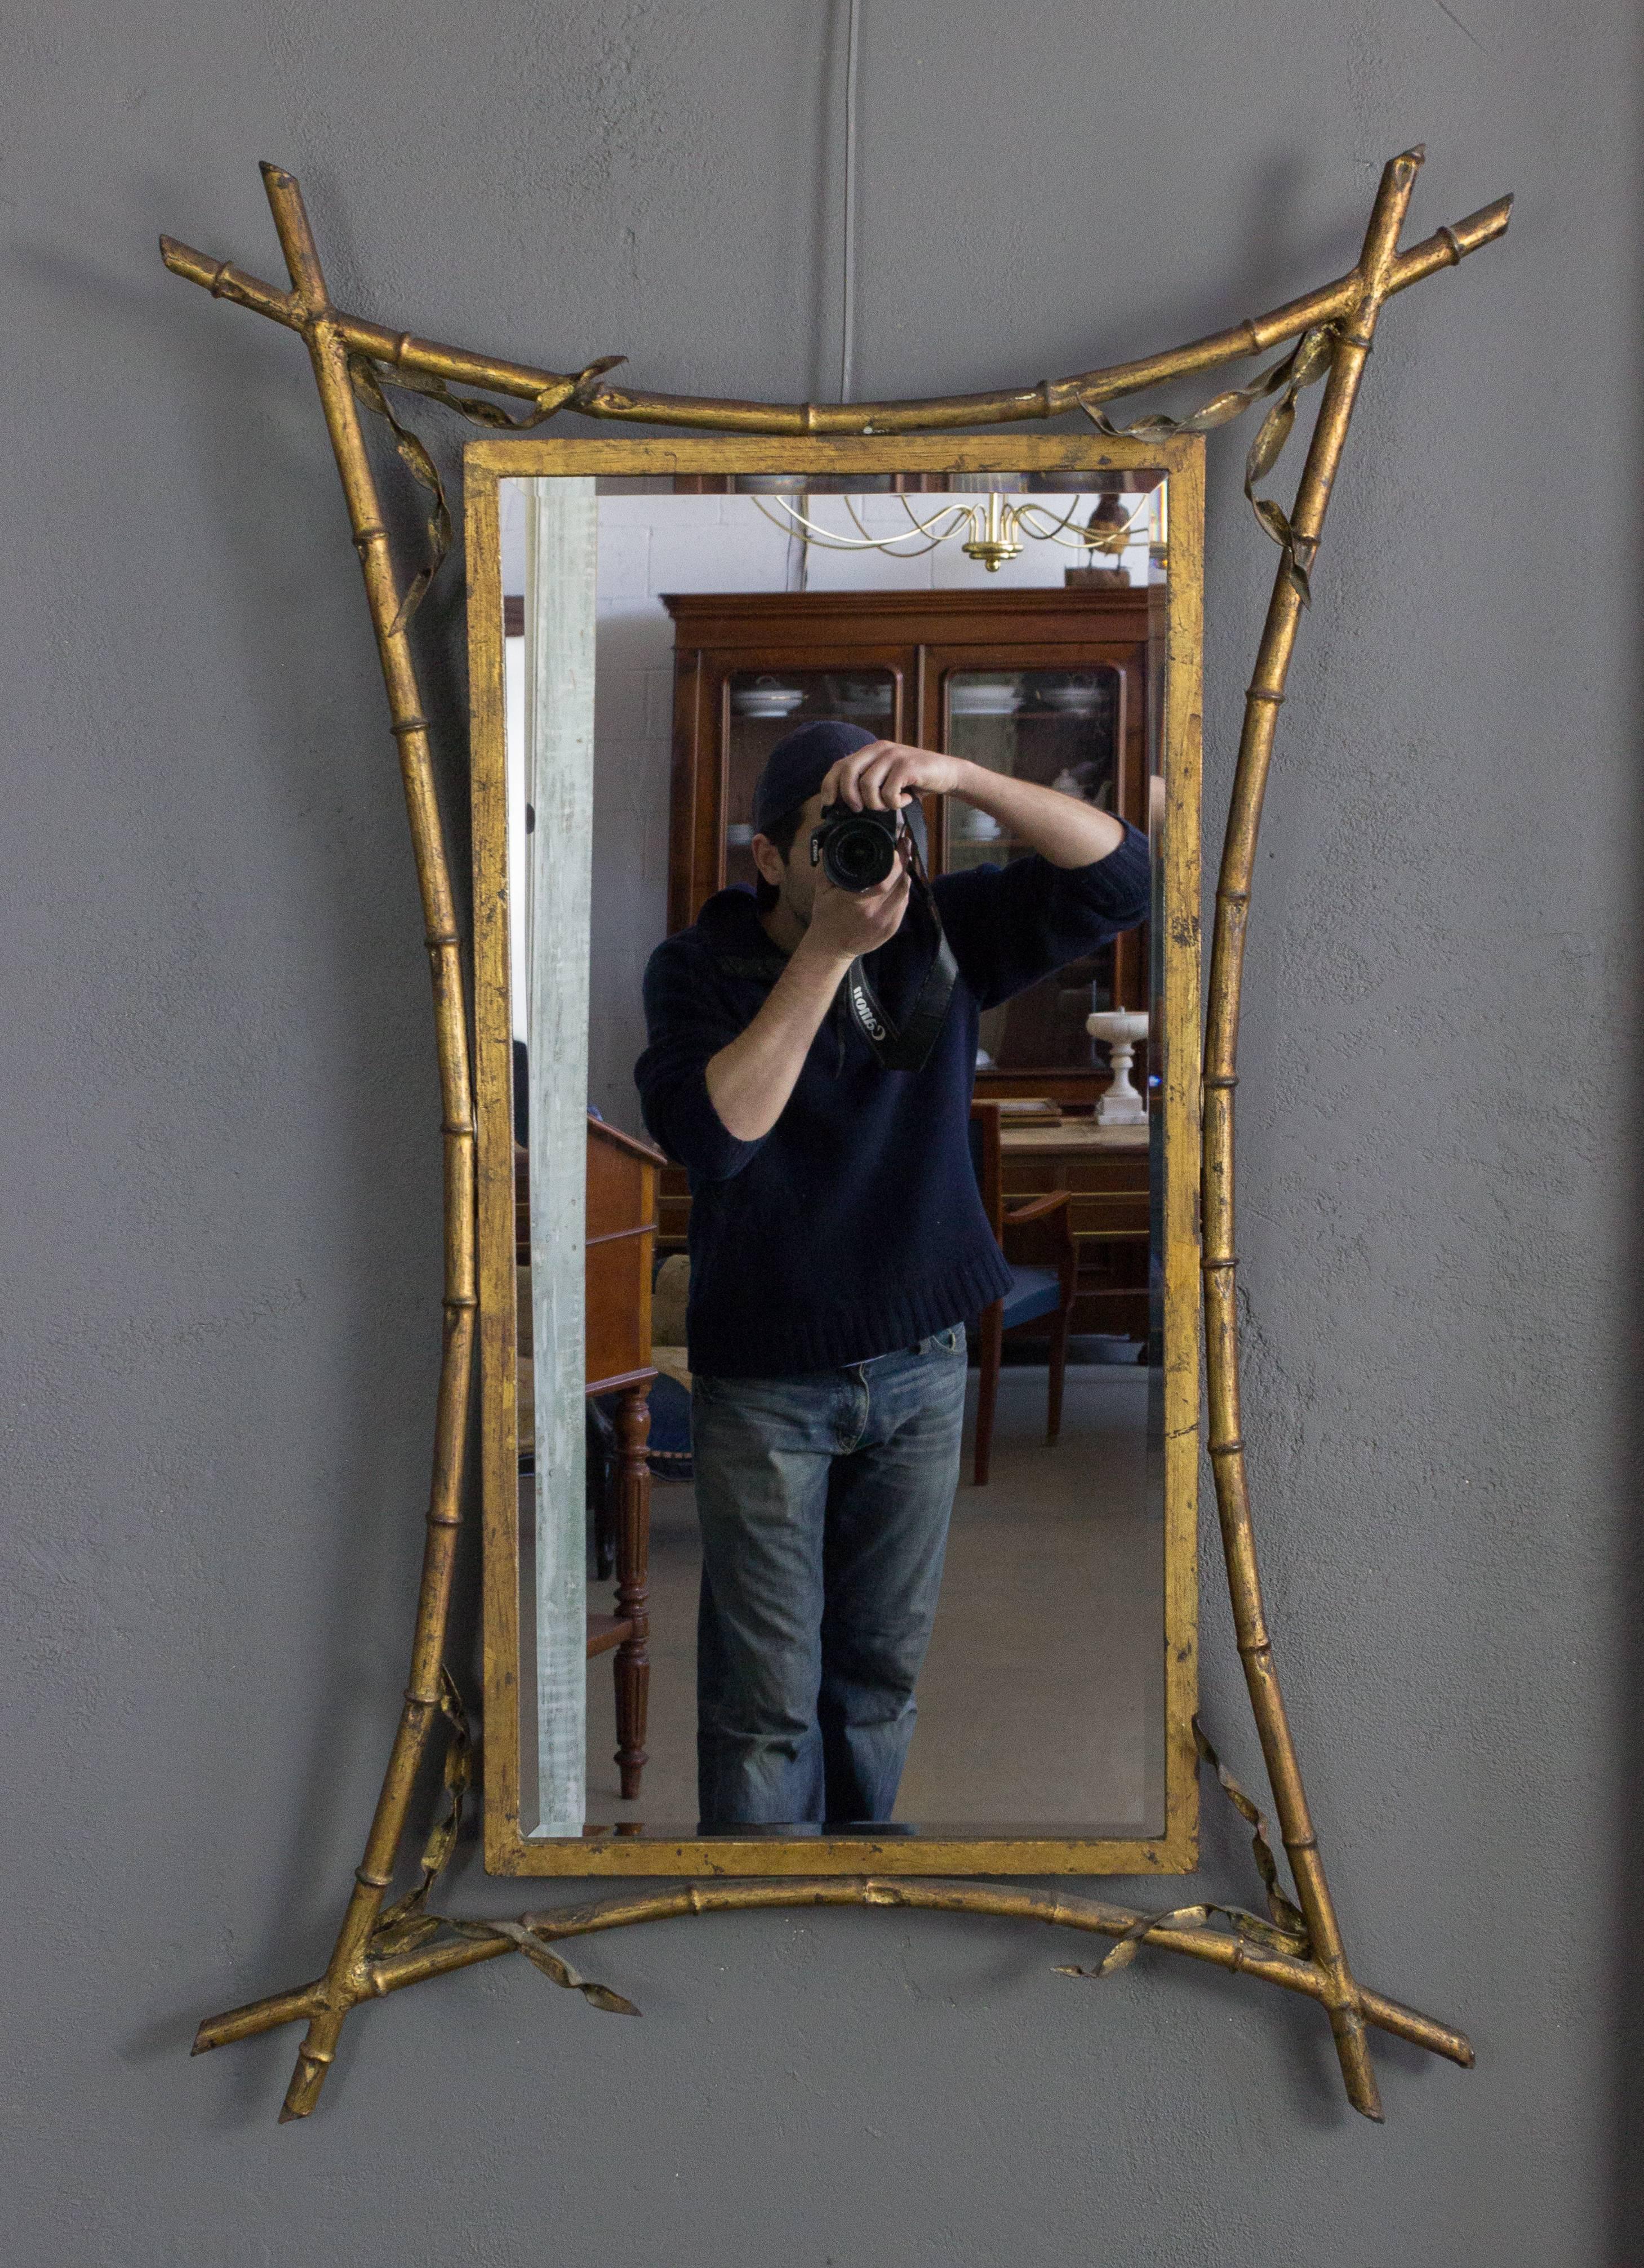 French gilt metal faux bamboo mirror. Vintage frame with new mirror. Very good condition.

Ref #: DM0400-11

Dimensions: 44”H x 29”W x 1”D